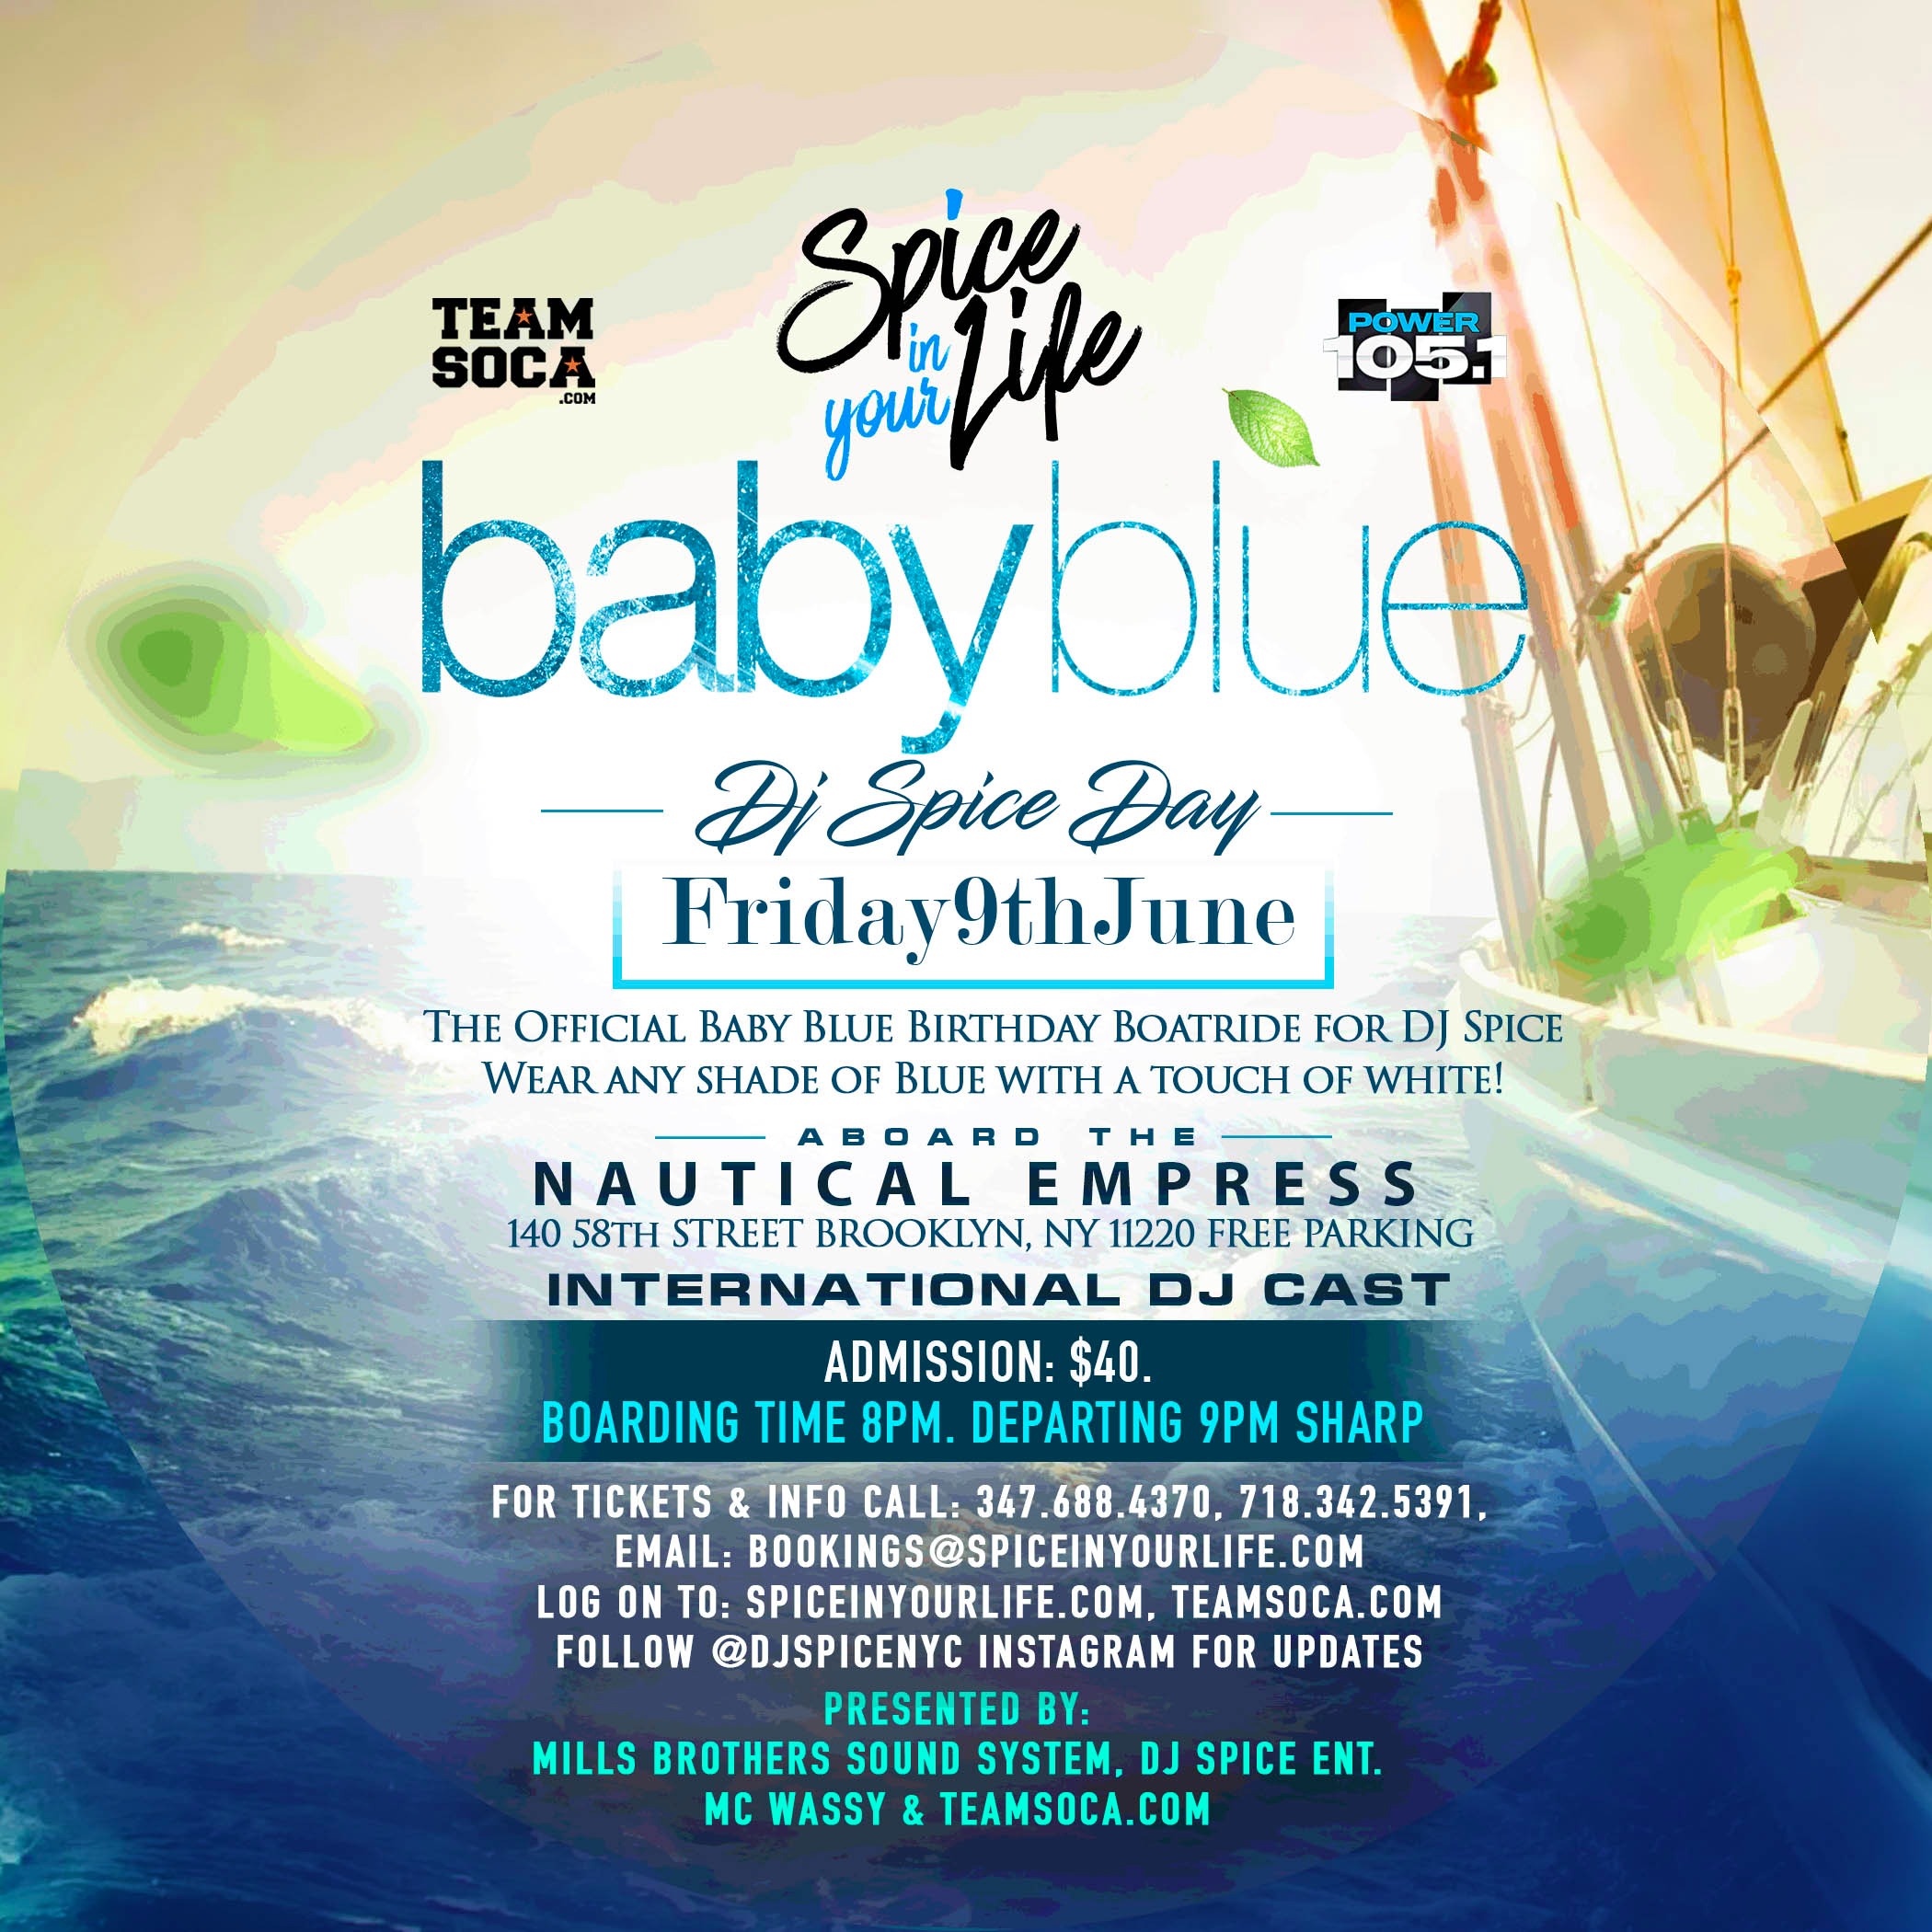 The Official Baby Blue Birthday Boatride for DJ Spice - DJ Spice Day